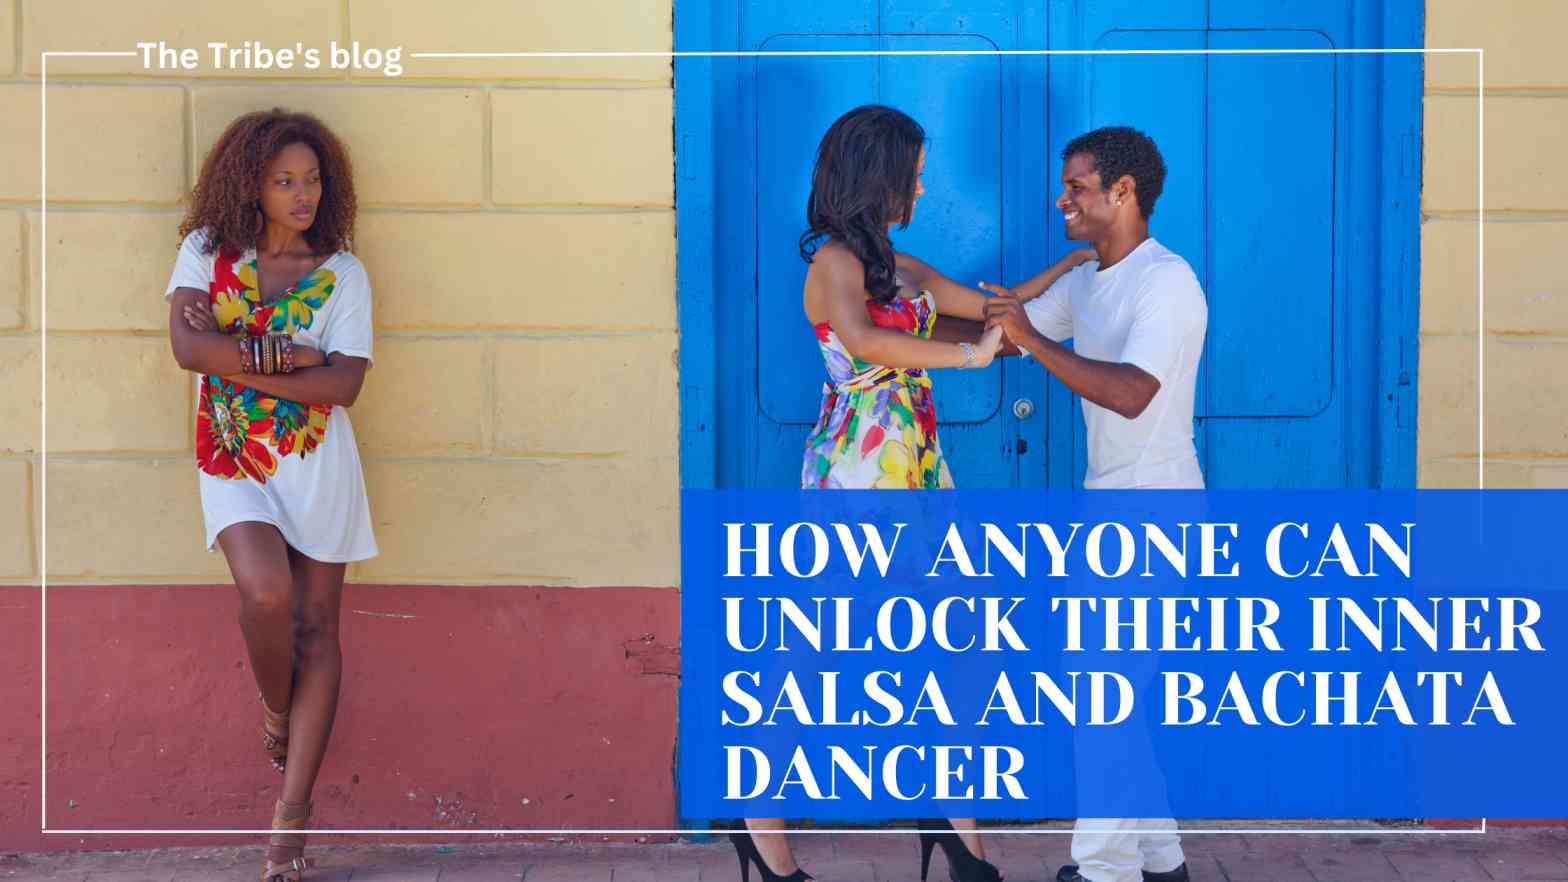 FORGET THE MYTH: HOW ANYONE CAN UNLOCK THEIR INNER SALSA AND BACHATA DANCER